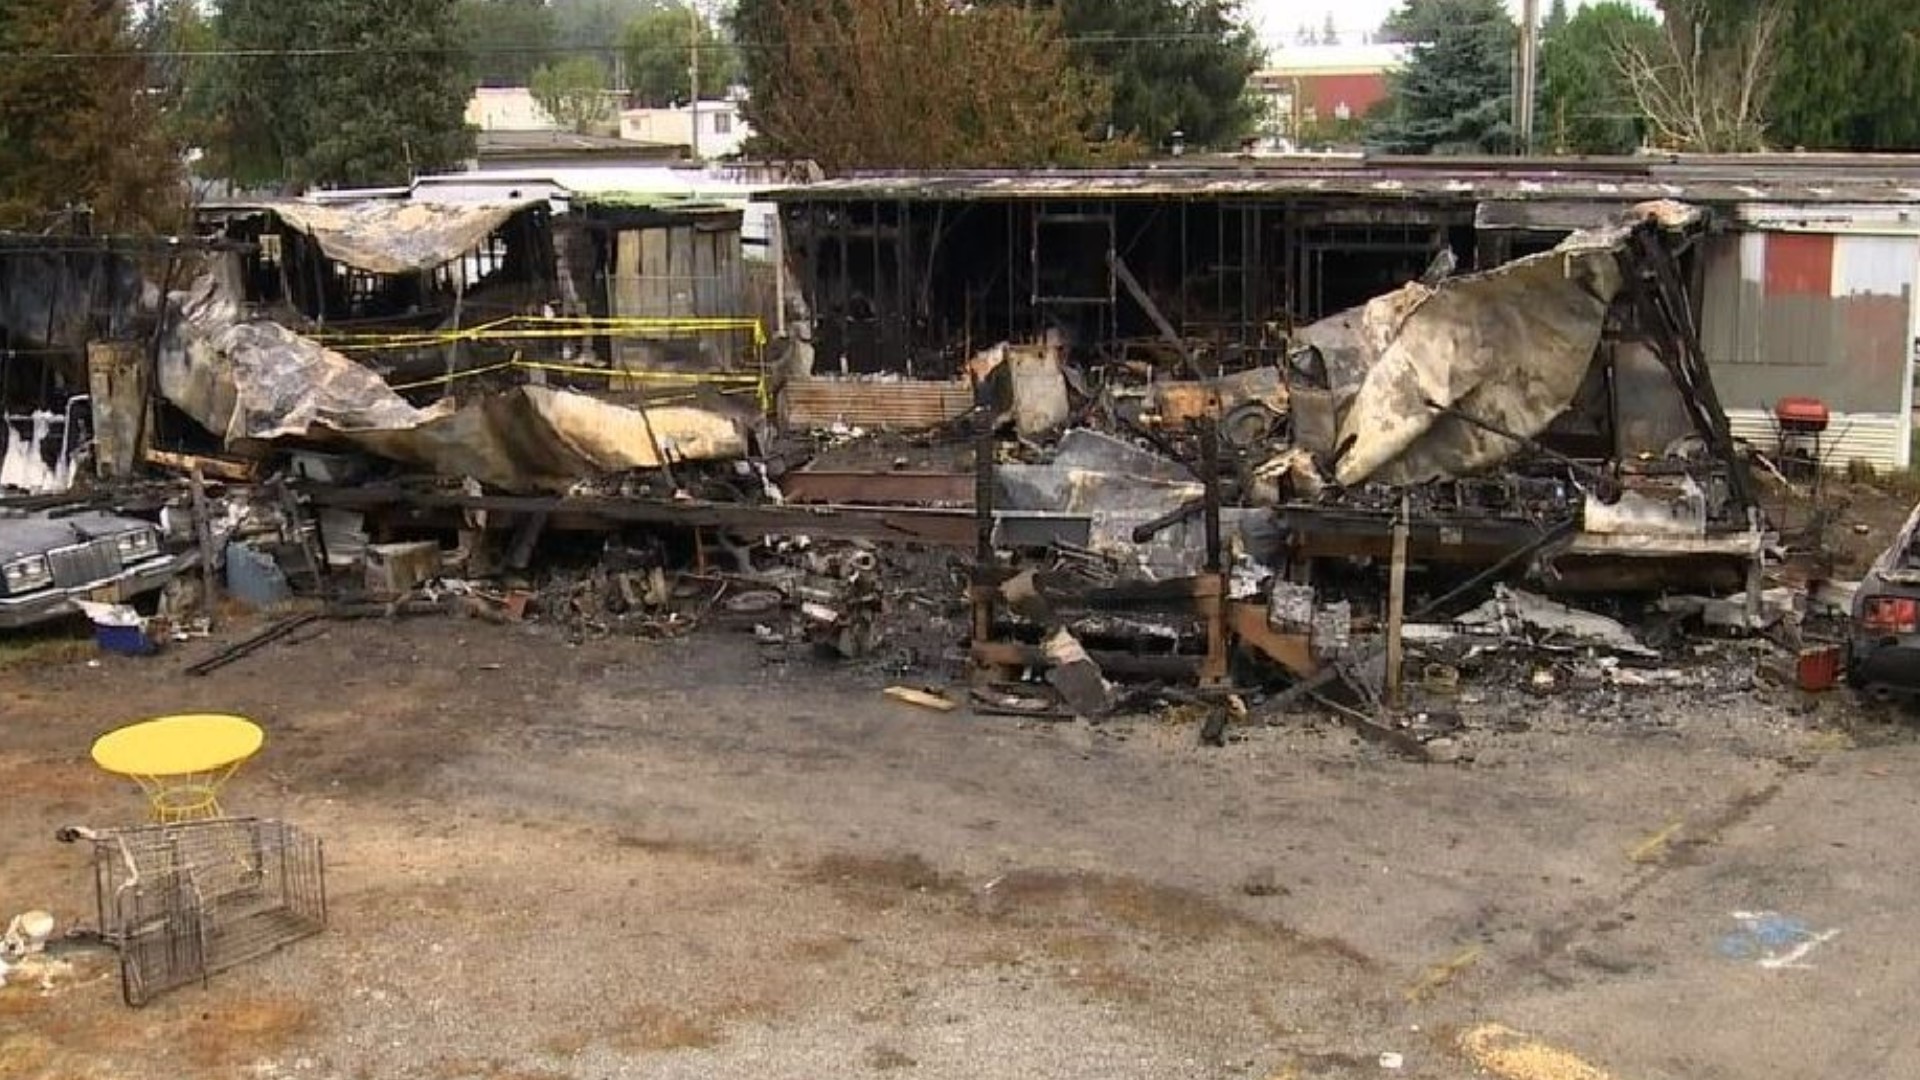 Three homes were destroyed and three pets were killed in the mobile home park fire.